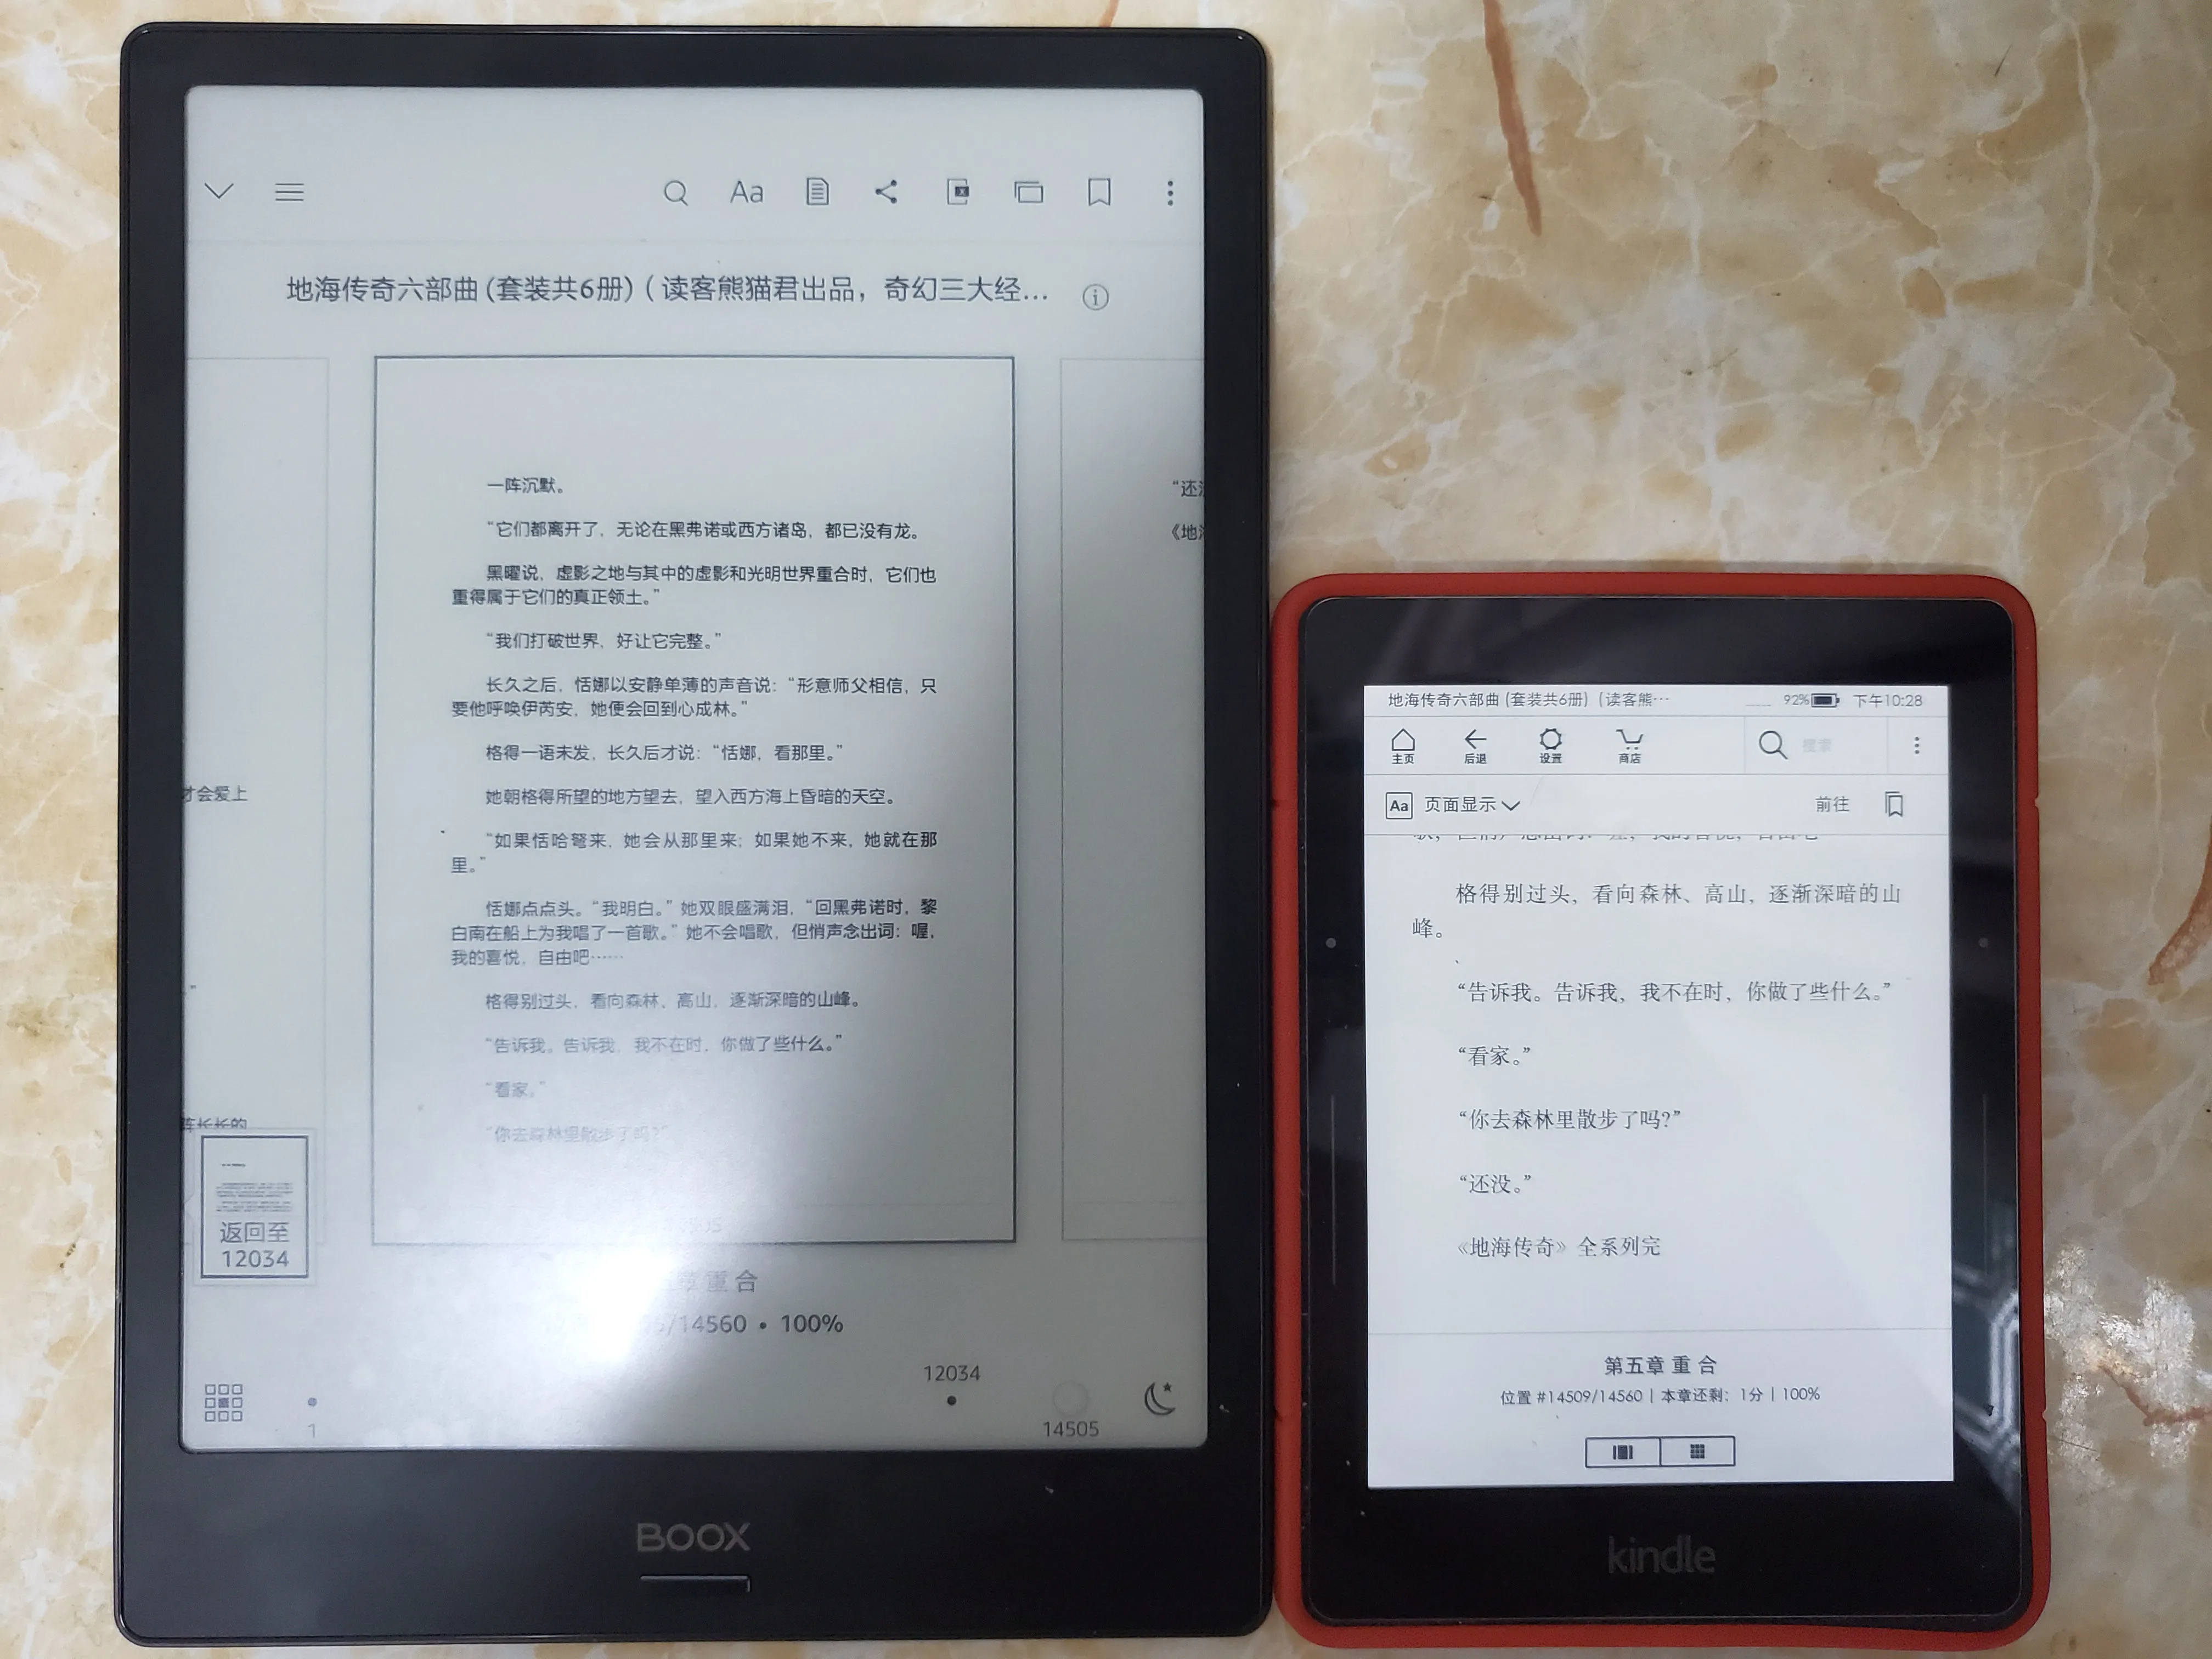 Android 版 Kindle 应用